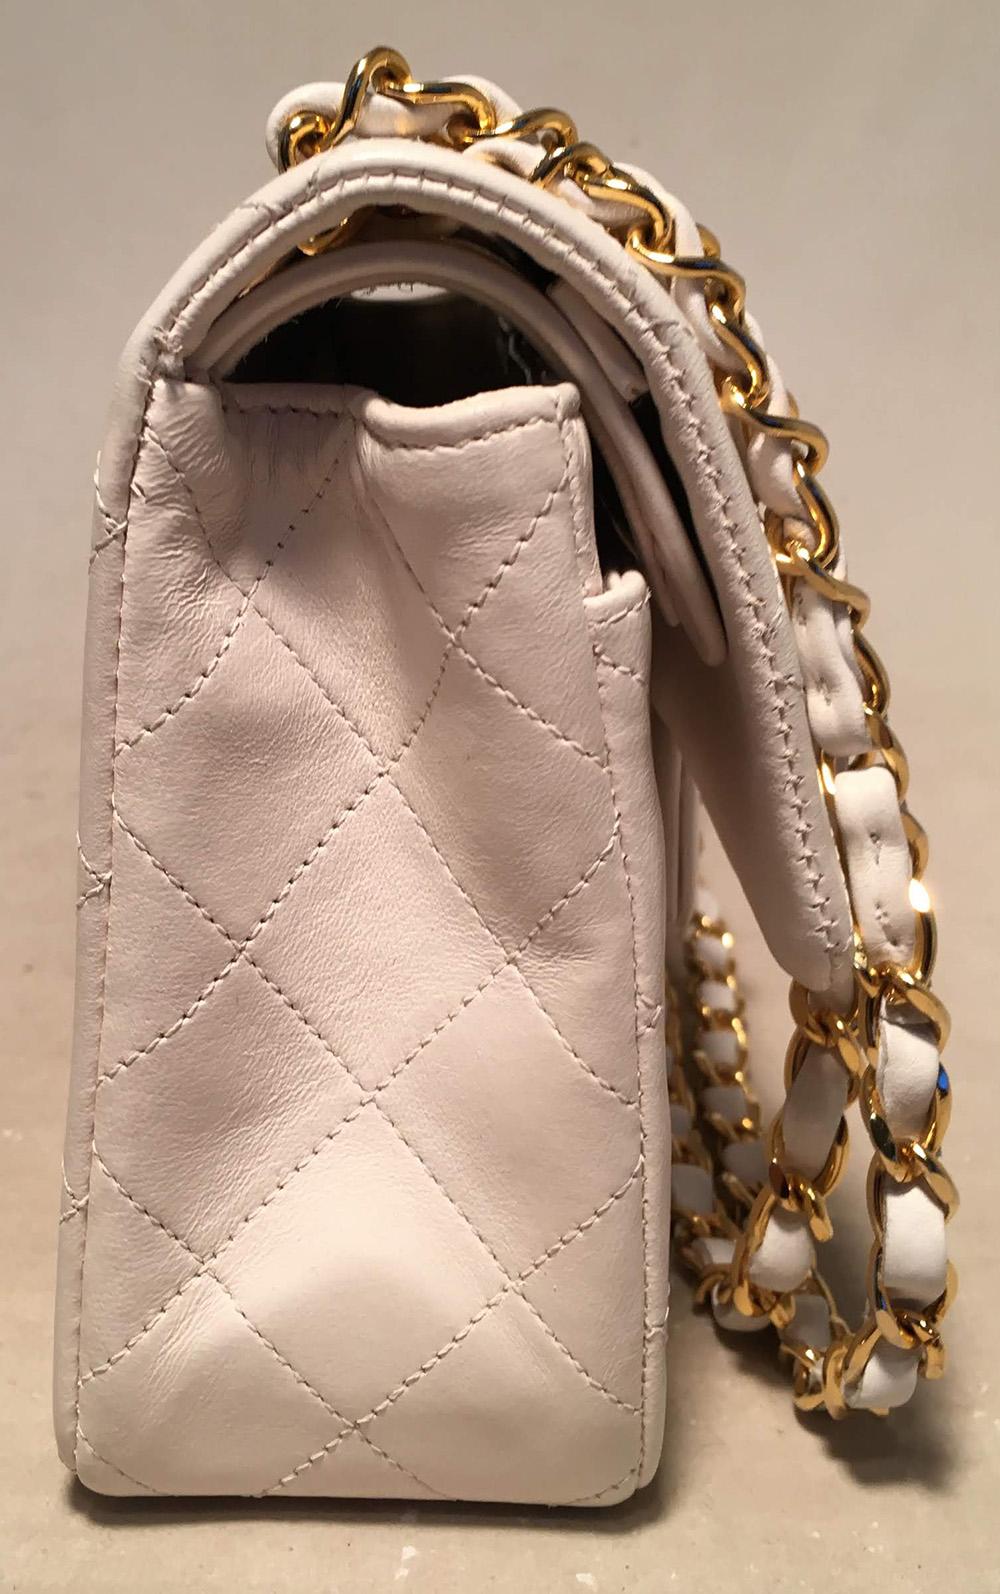 Chanel Vintage White 9 inch 2.55 Double Flap Classic Shoulder Bag in excellent condition. White quilted lambskin exterior trimmed with gold hardware and signature woven chain and leather shoulder strap that can be worn short or long to suit your